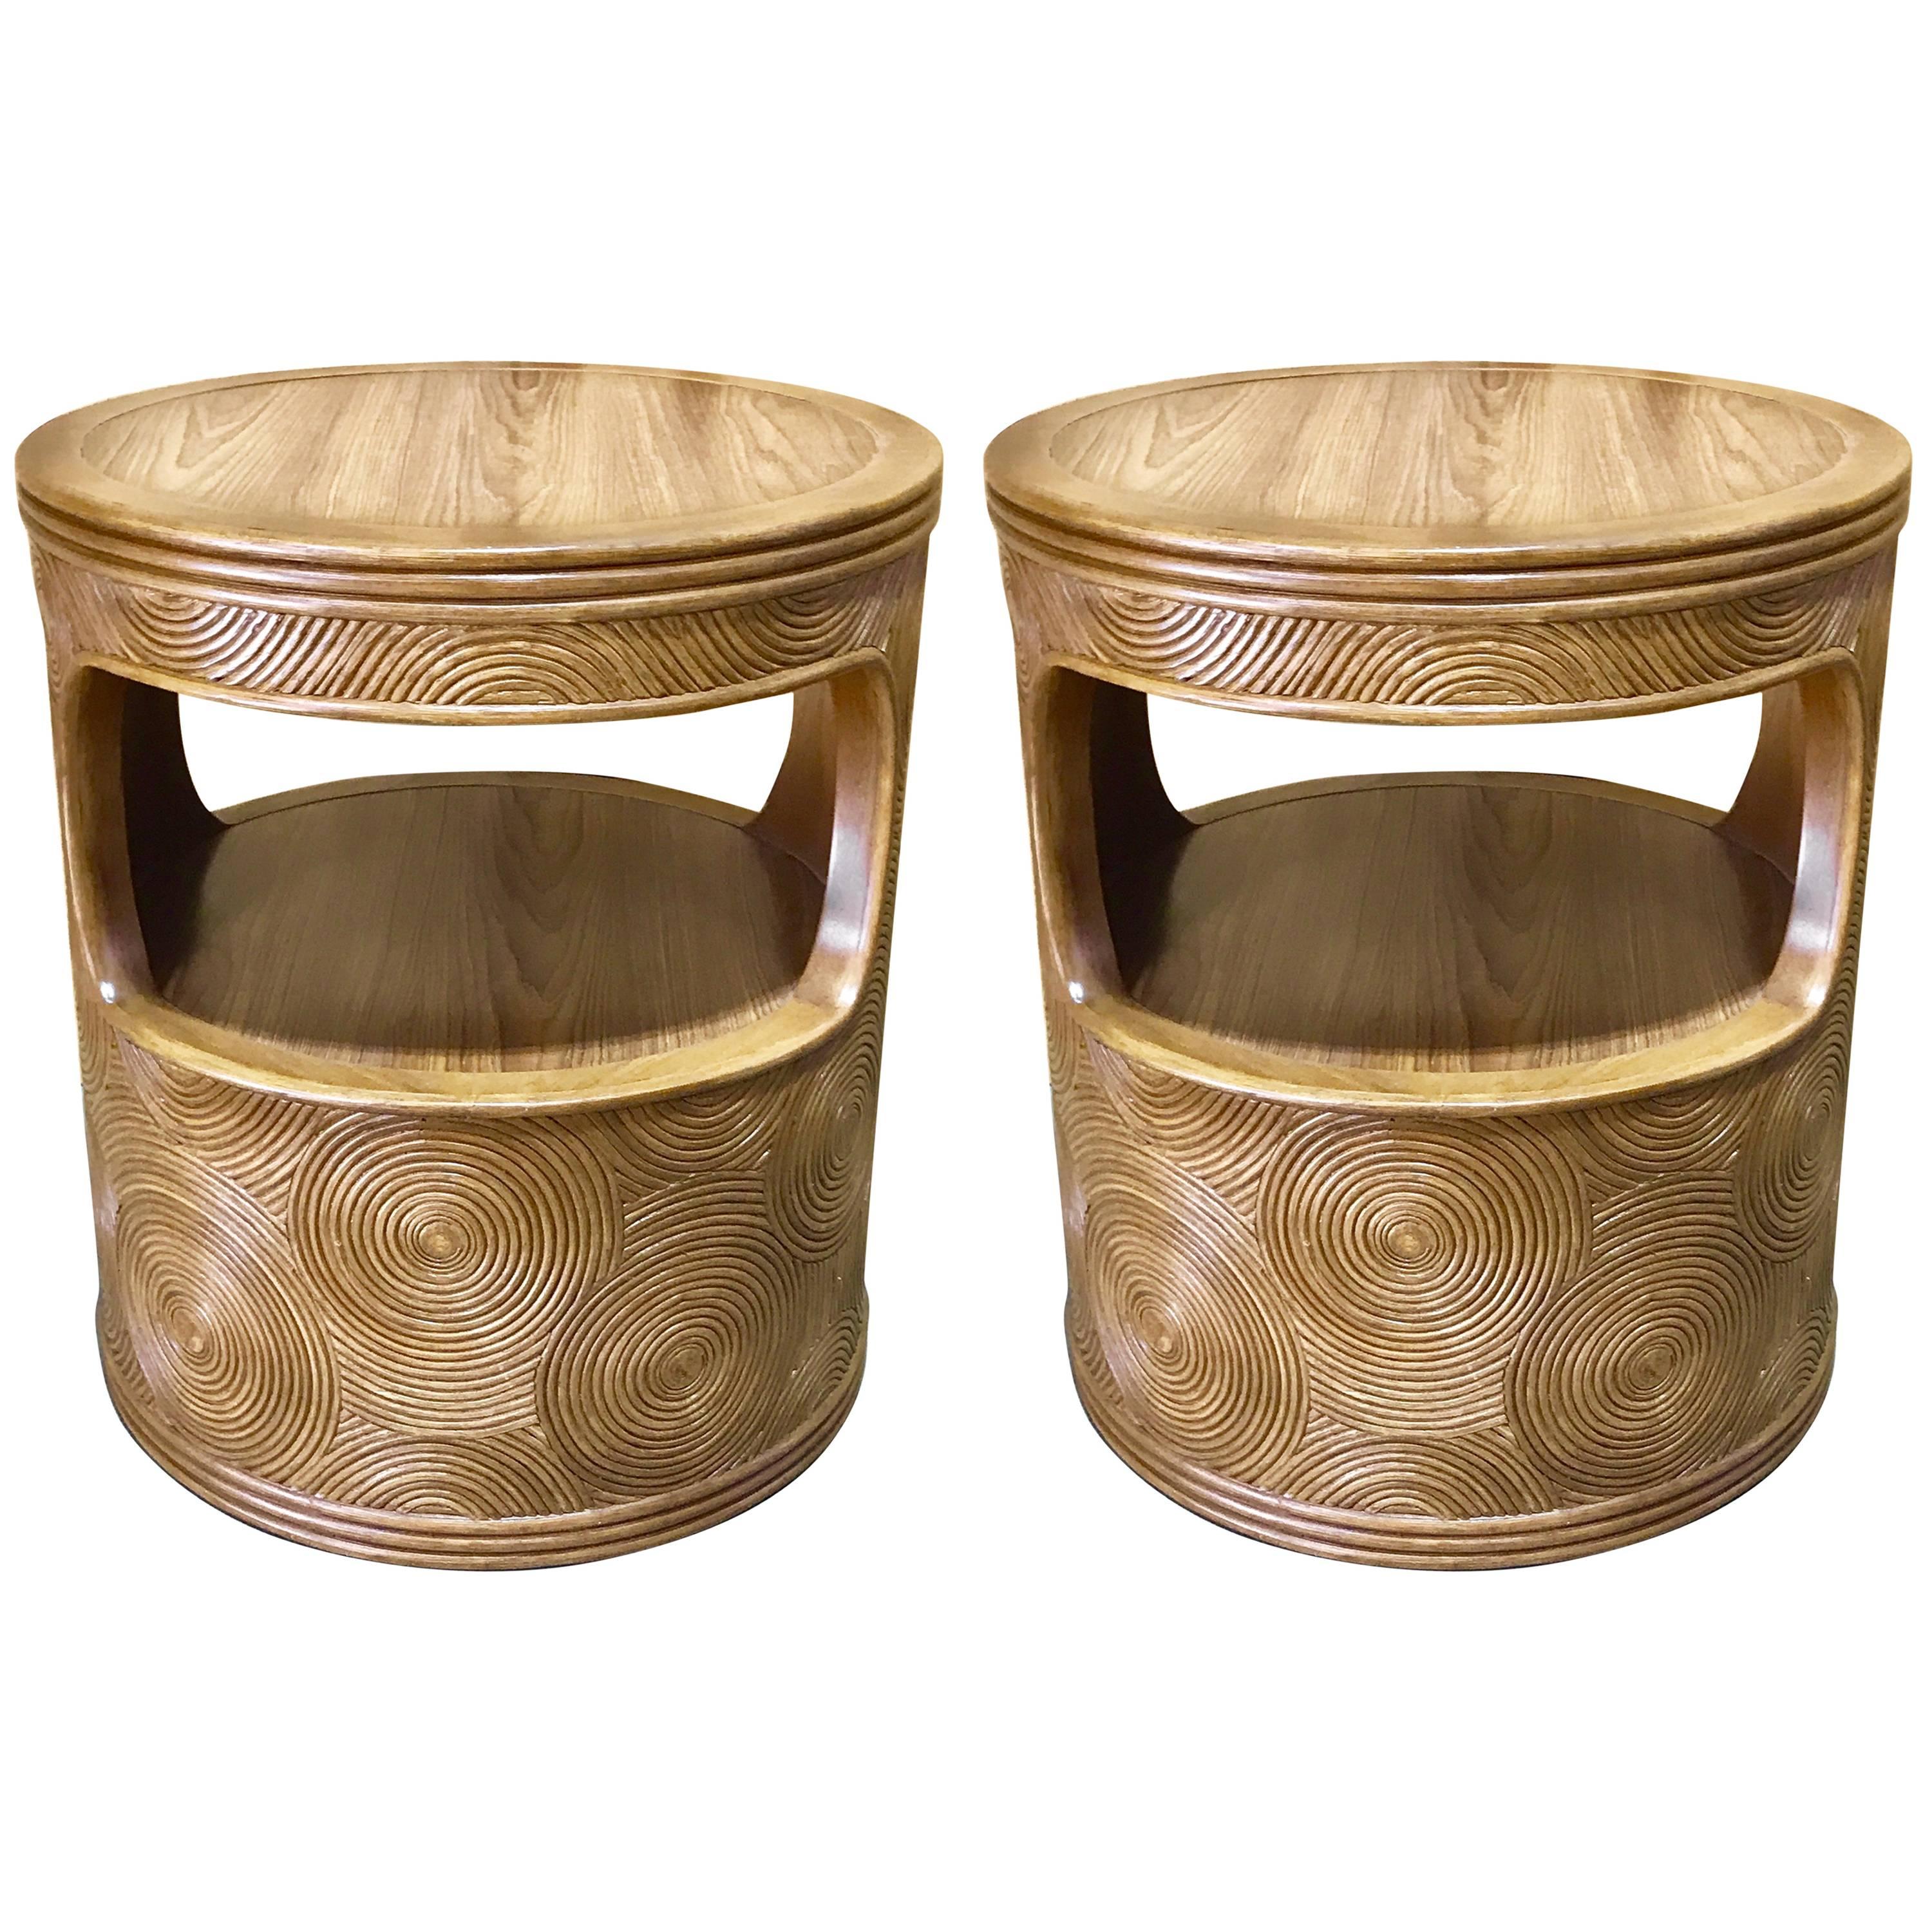 Pair of Mod Bamboo & Reed Round End Tables, in the Manner of Gabriella Crespi